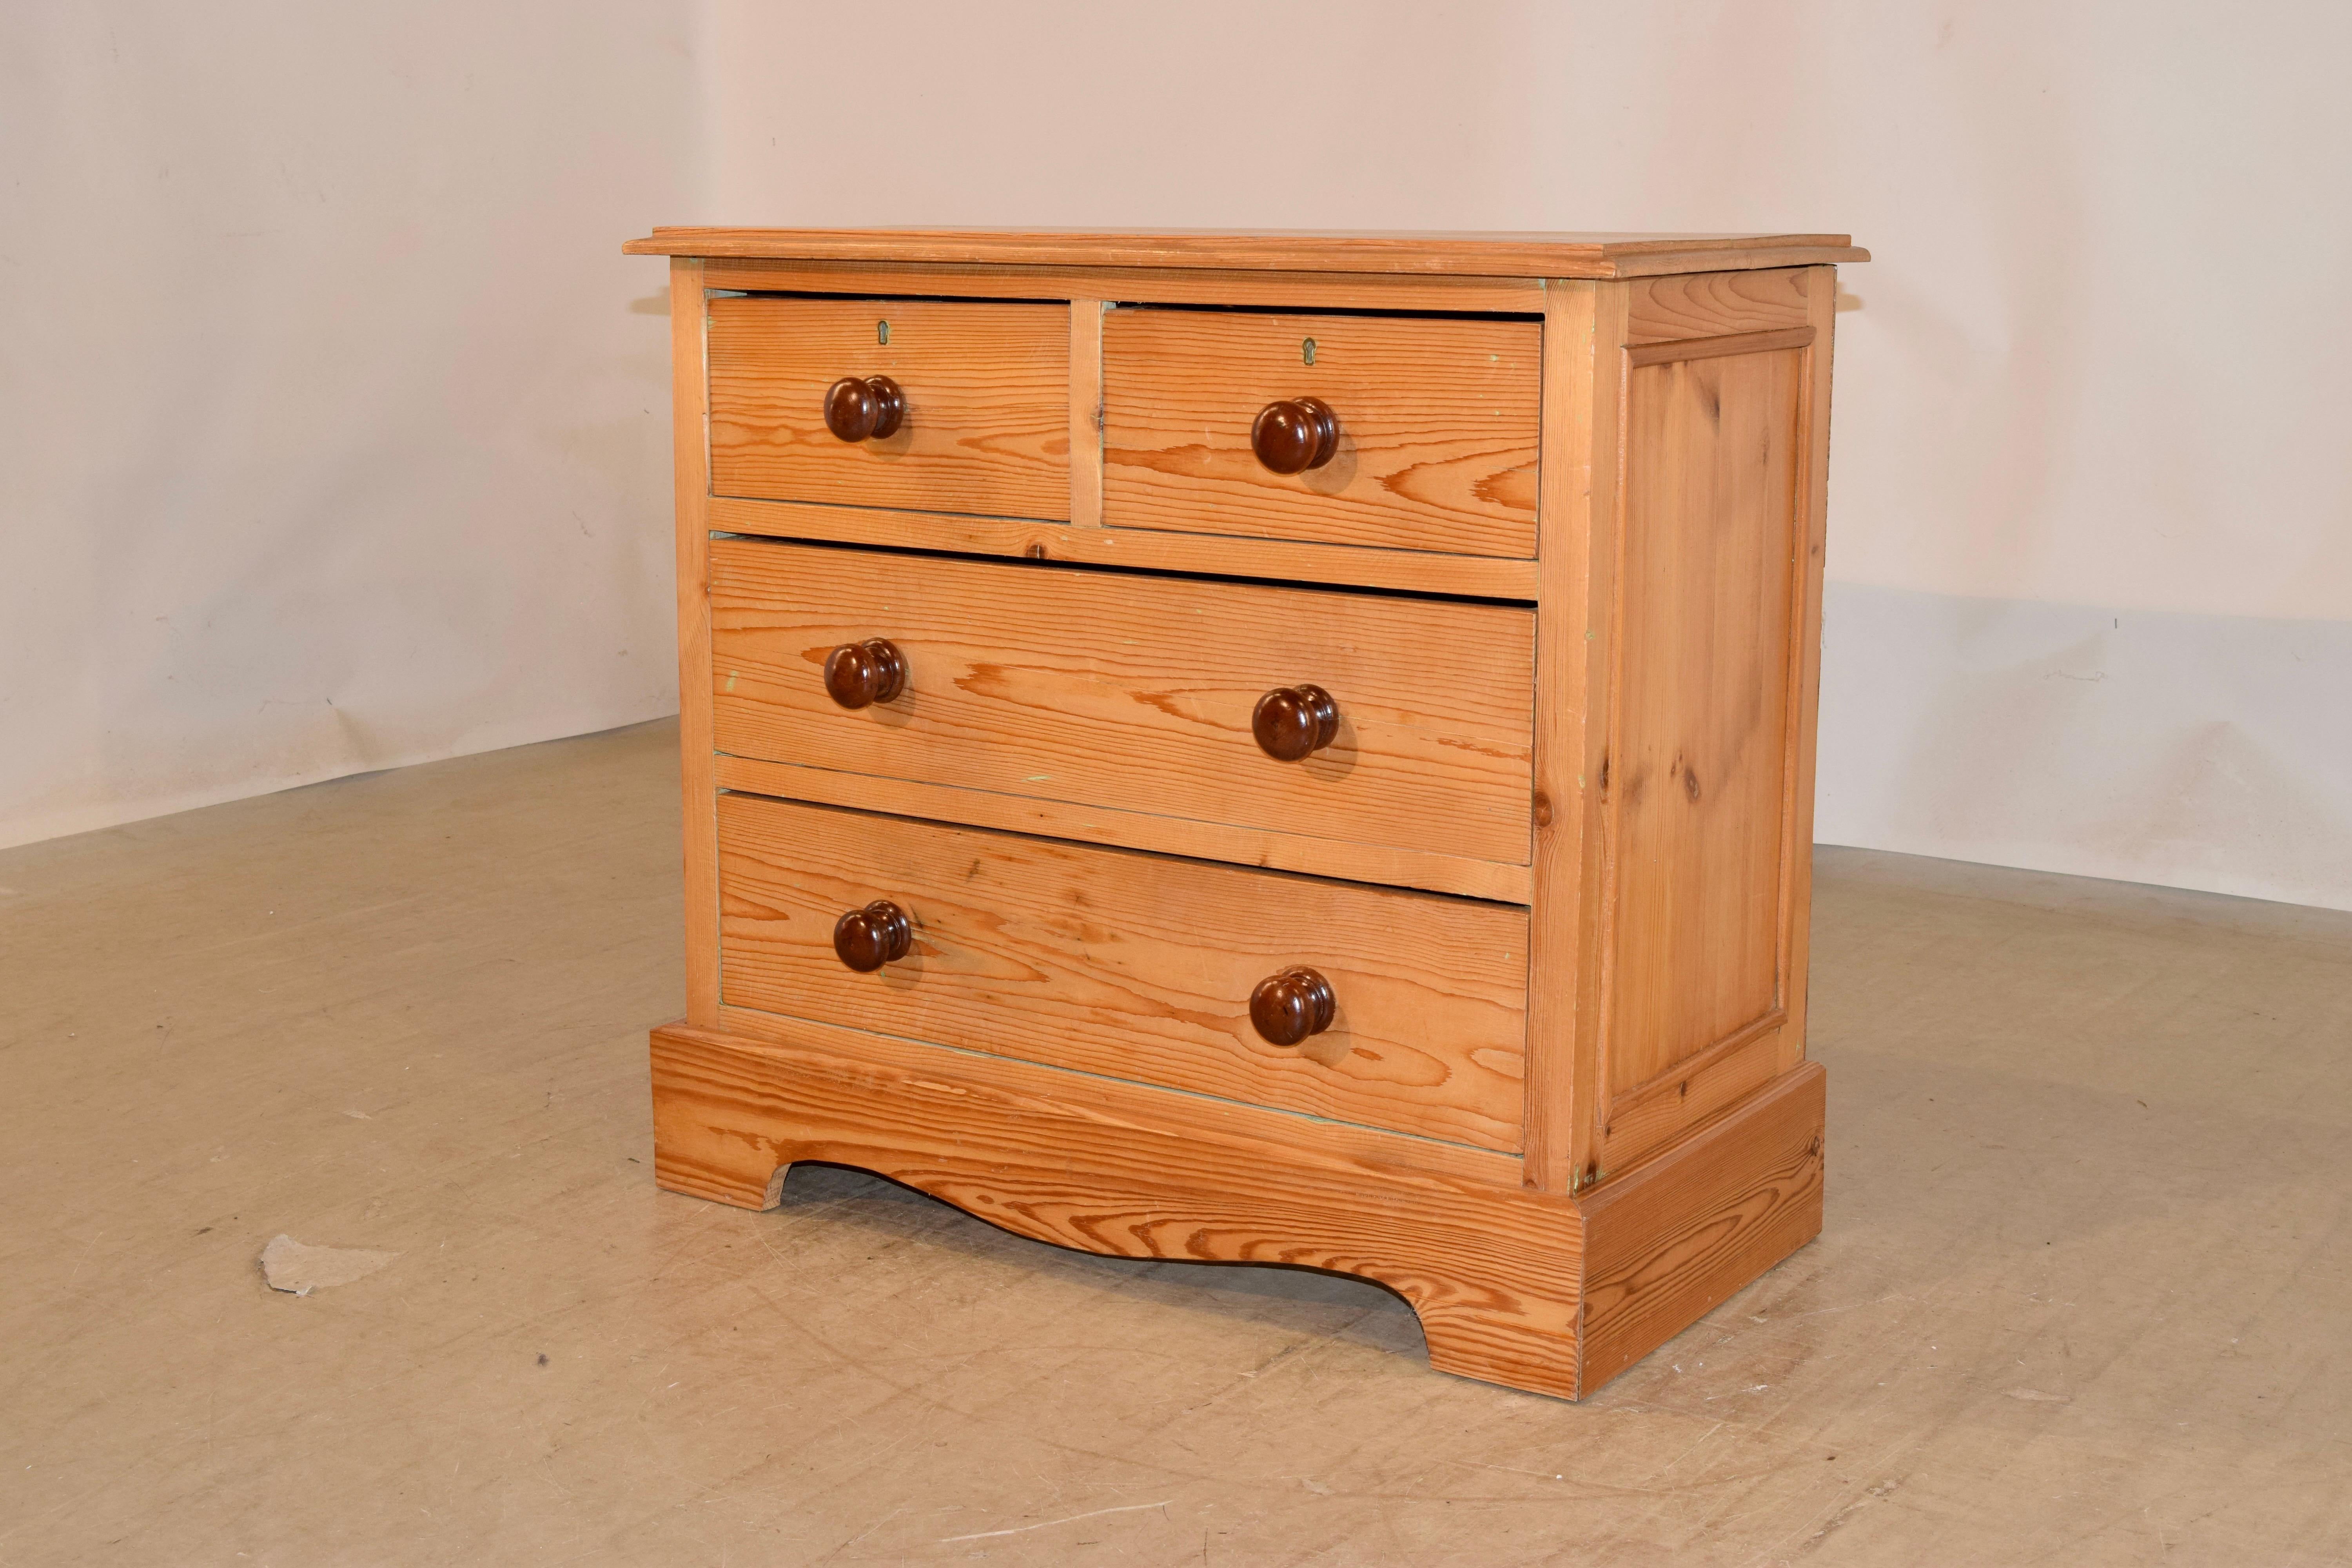 19th Century Small Pine Chest of Drawers In Good Condition For Sale In High Point, NC